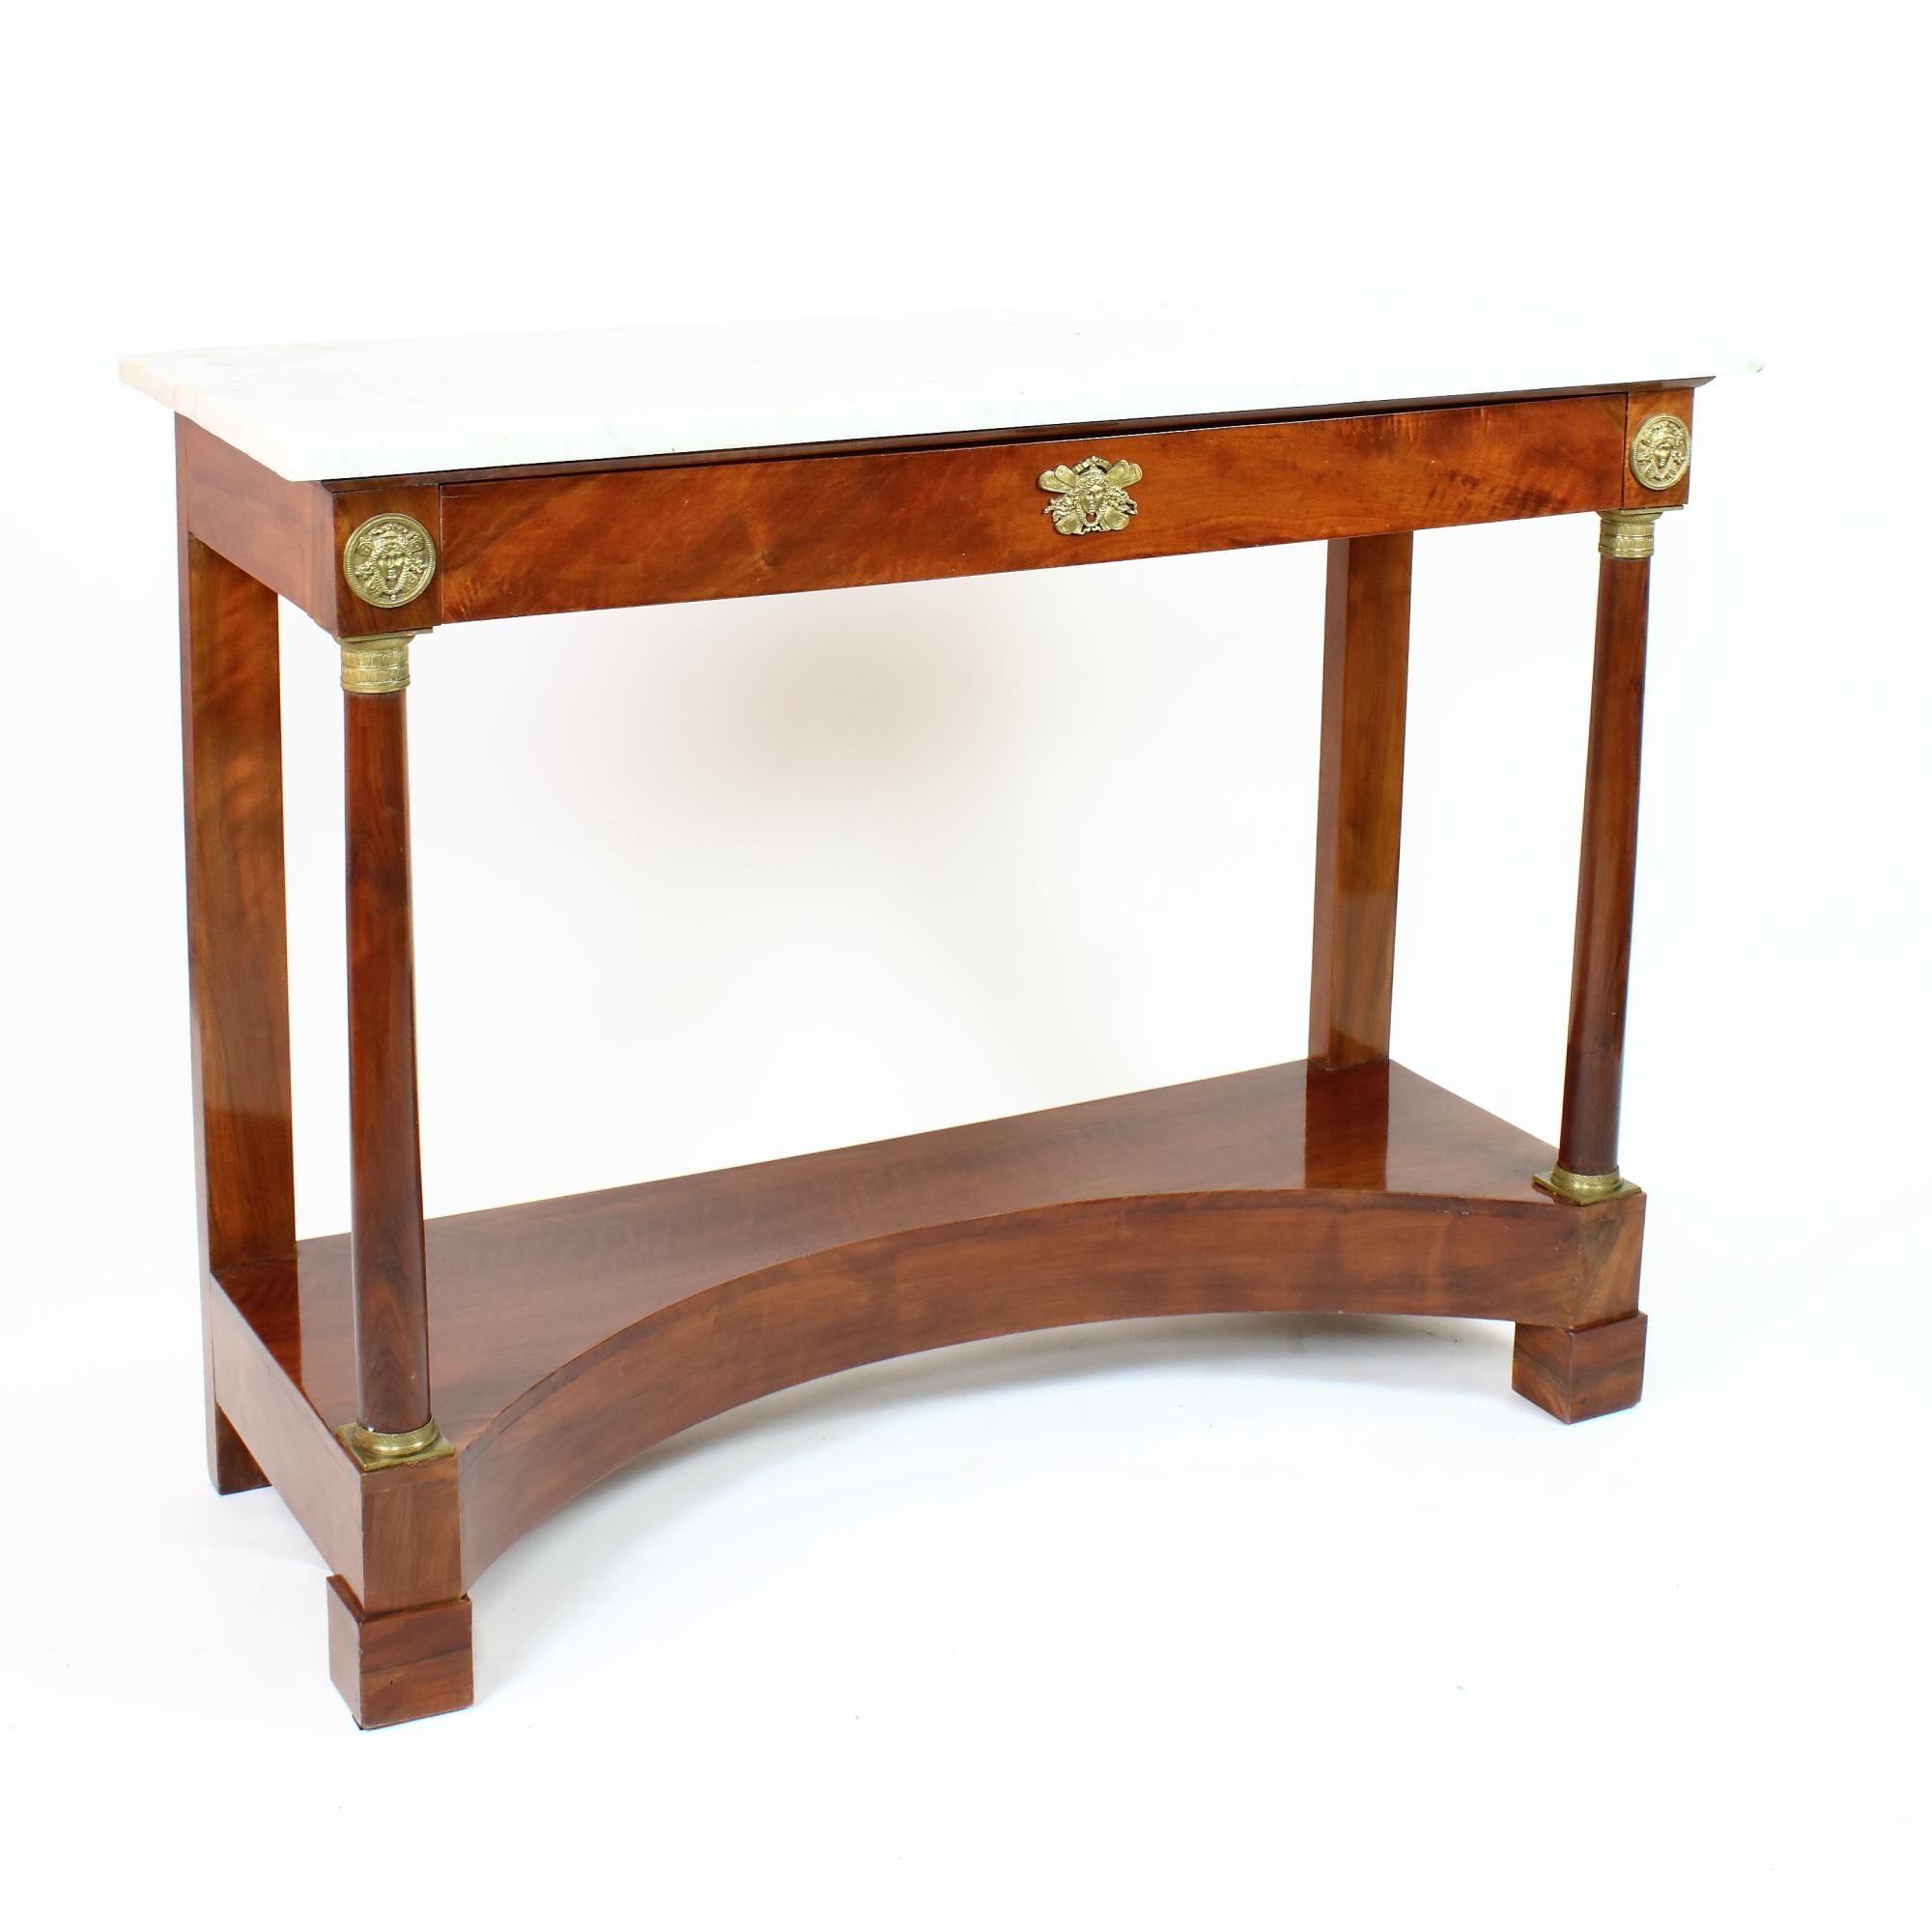 Early 19th Century French Empire Large Neoclassical Walnut Console Table For Sale 3